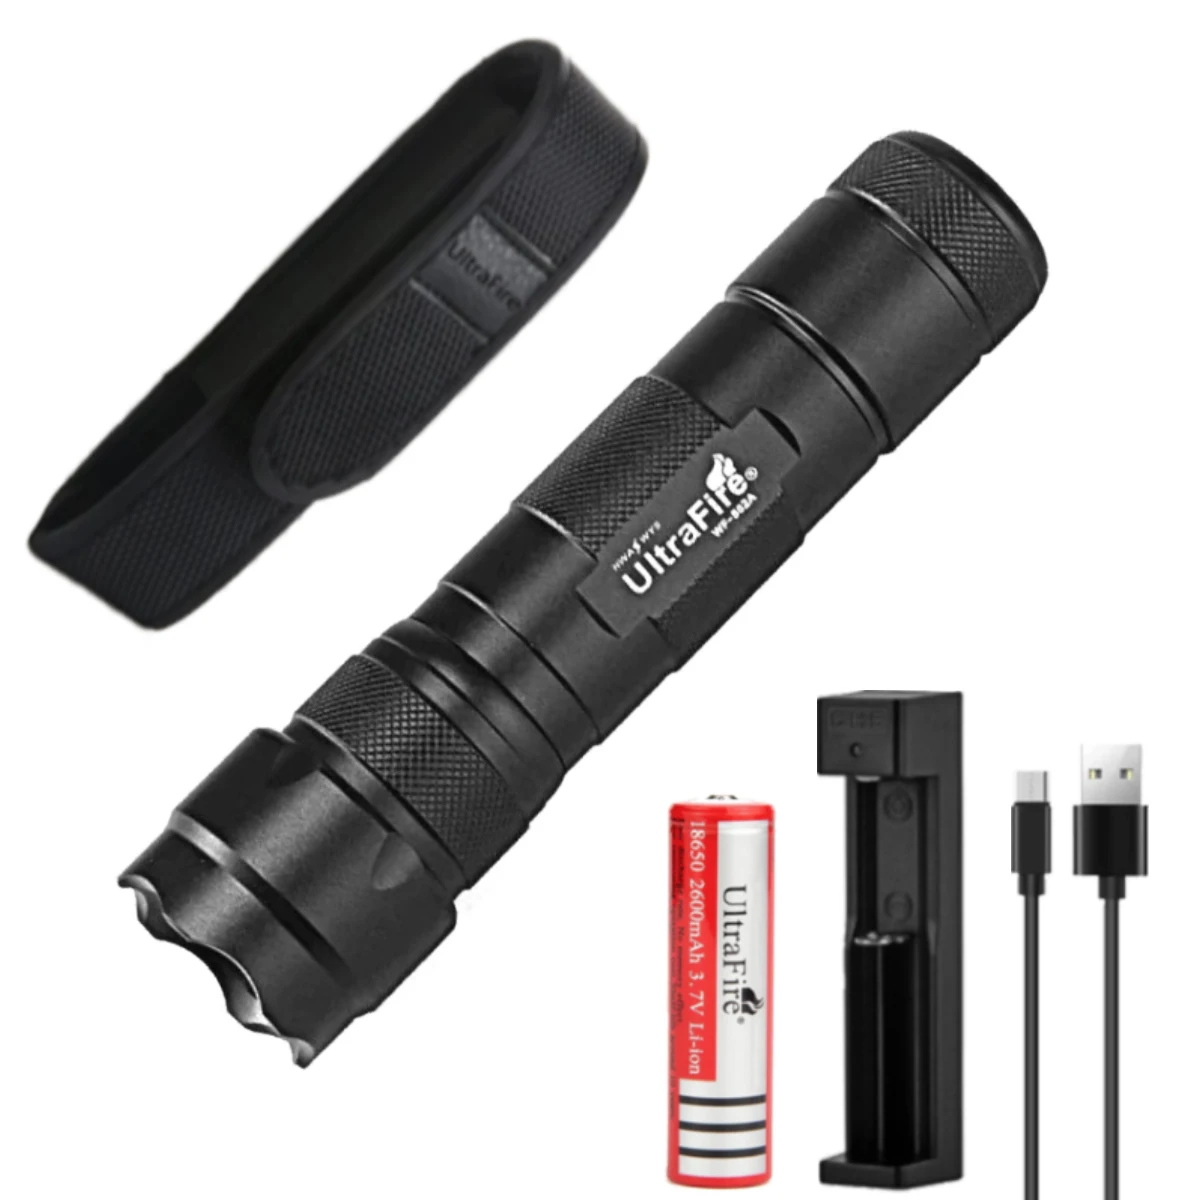 

UltraFire UF-502A High Power Led Flashlight Camping Torch 1000 Lumens Rechargeable Lamp Waterproof Use 18650 3 AAA Batteries